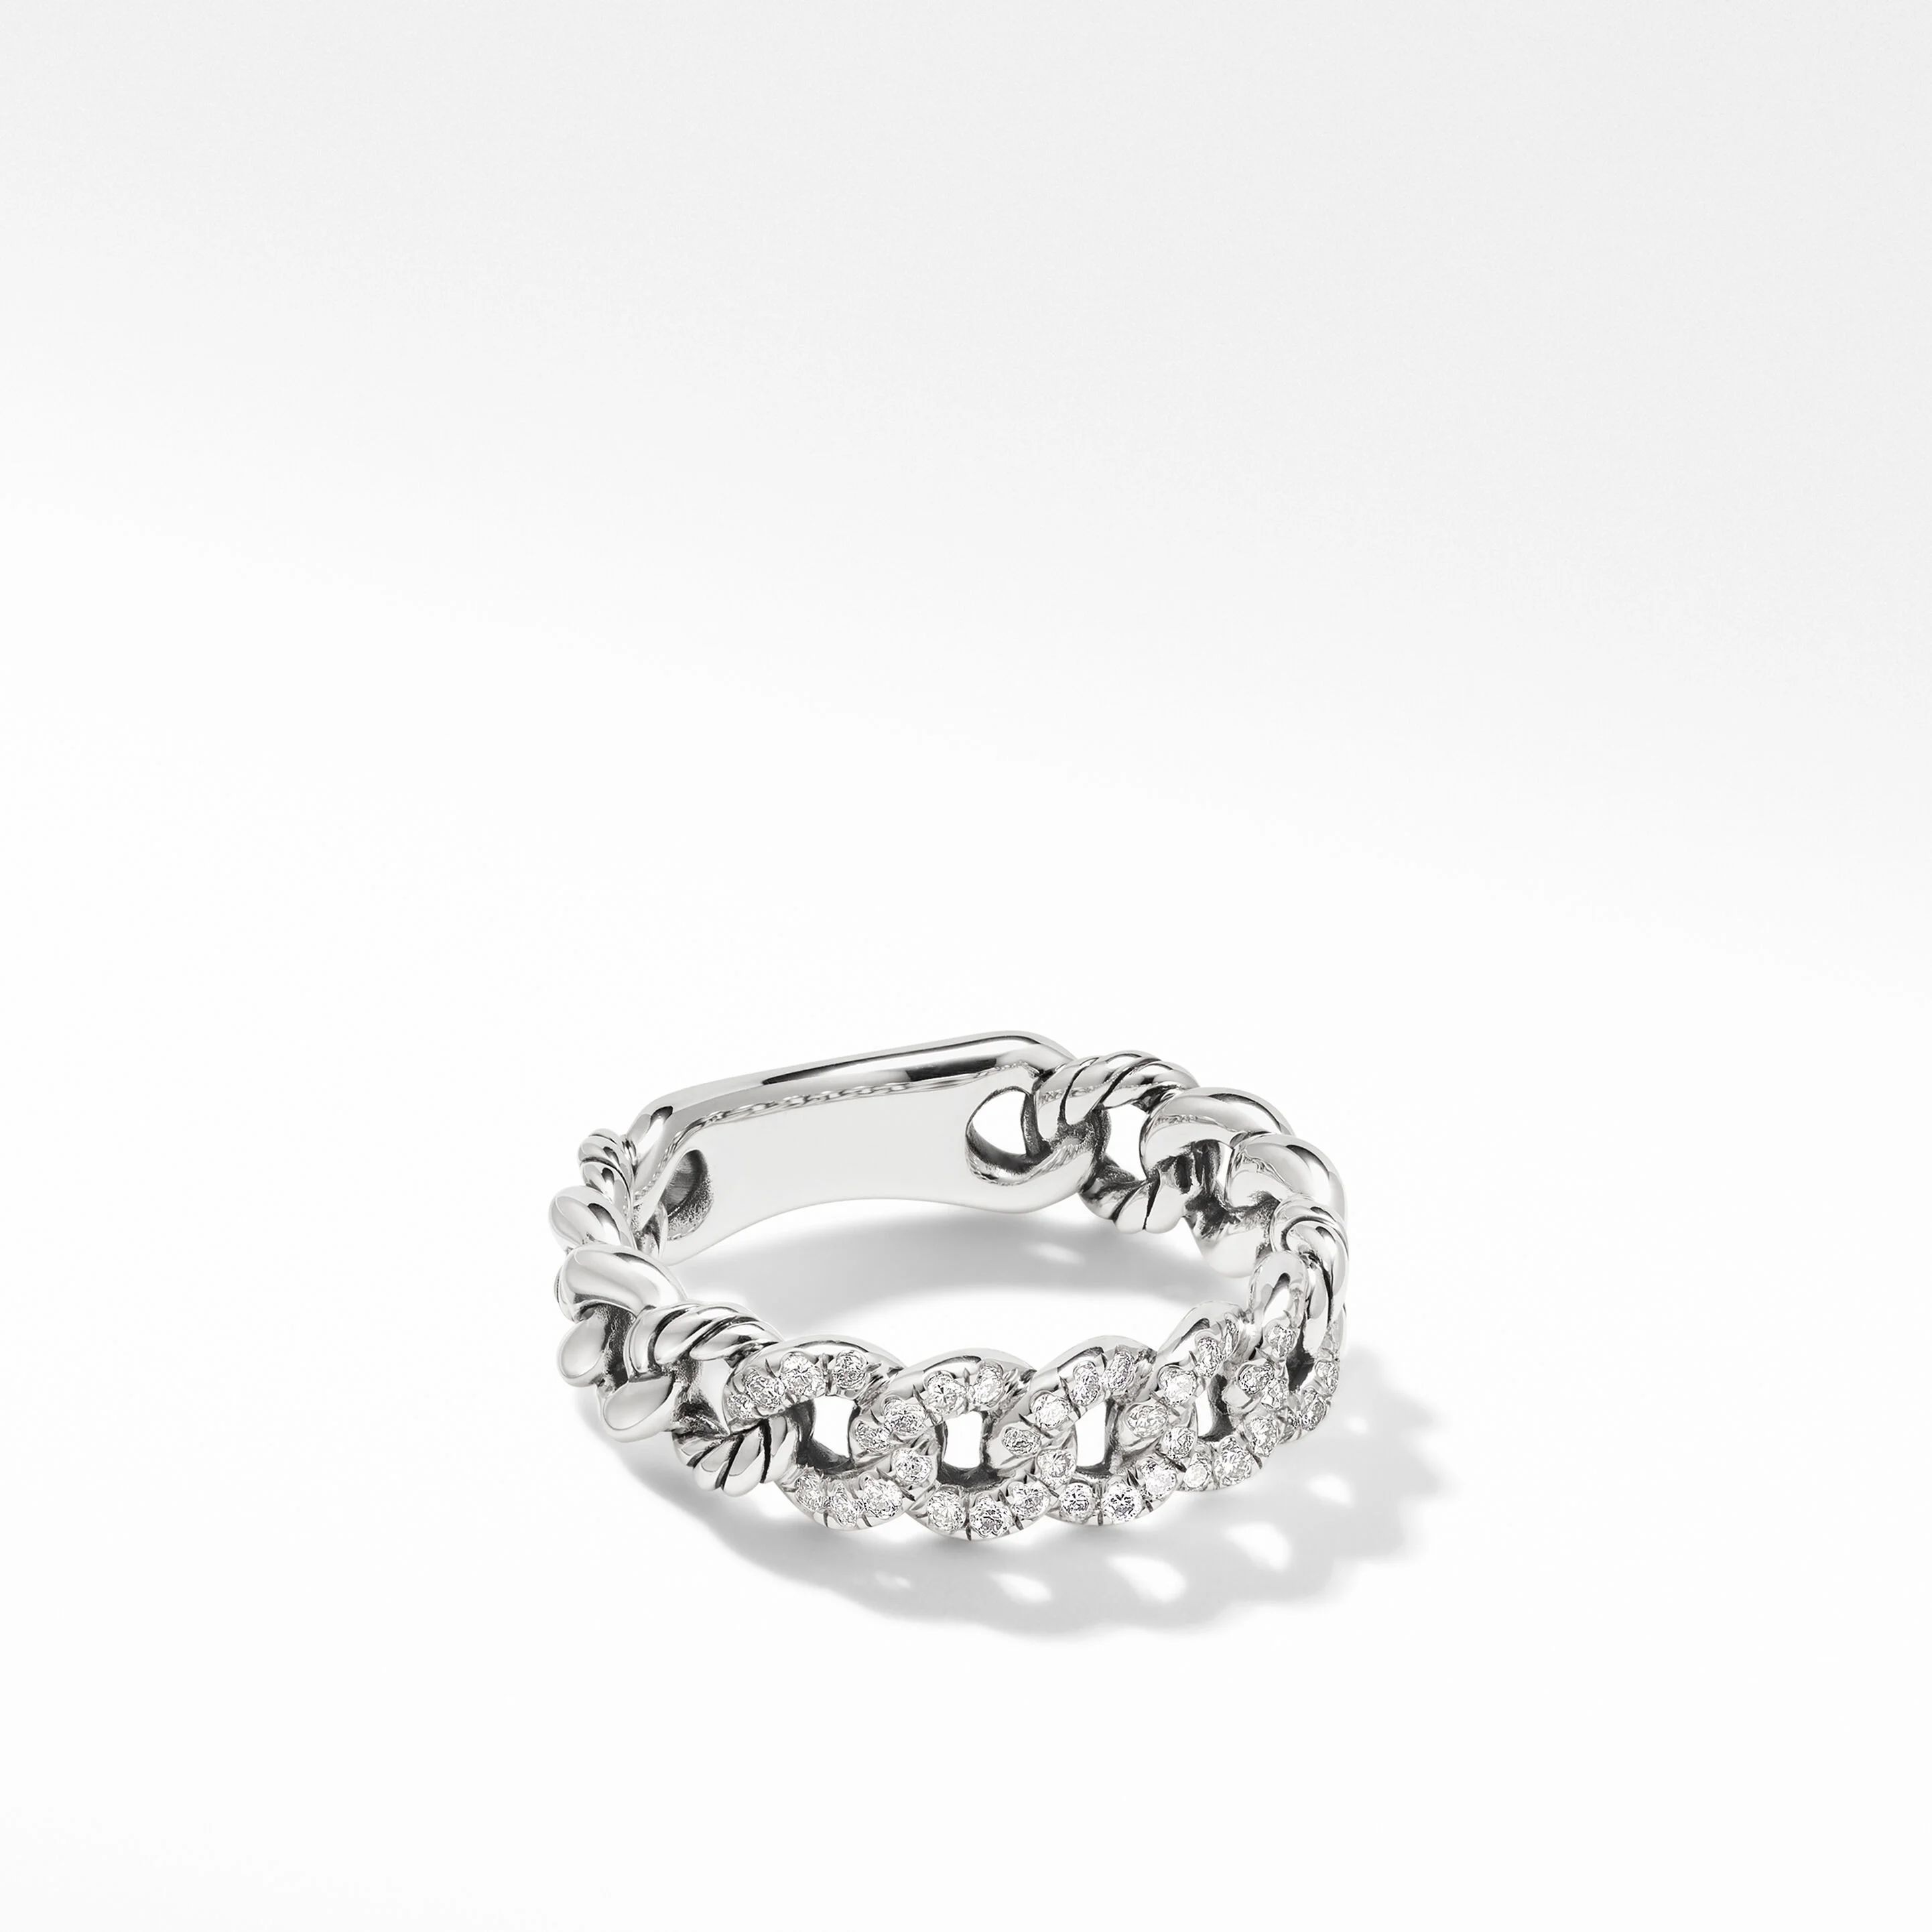 Belmont® Curb Link Band Ring in Sterling Silver with Pavé Diamonds | David Yurman